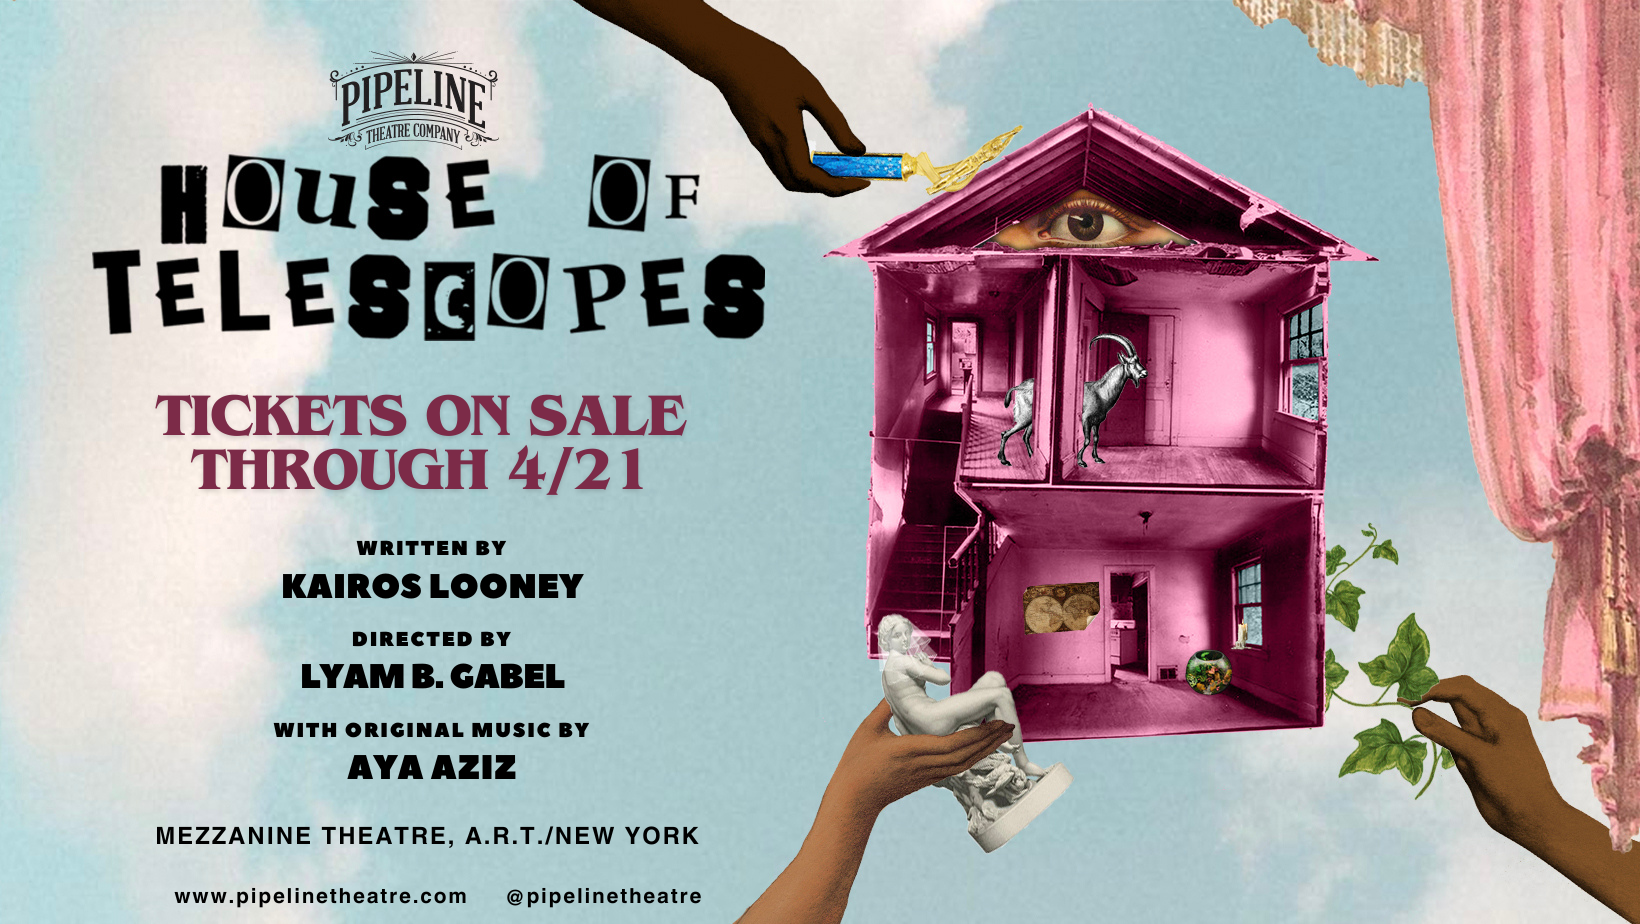 House of Telescopes Tickets on sale through 6/21 Written by Kairos Looney Directed by Lyam B. Gabel Original Music by Aya Aziz Mezzanine Theatre at A.R.T./NY